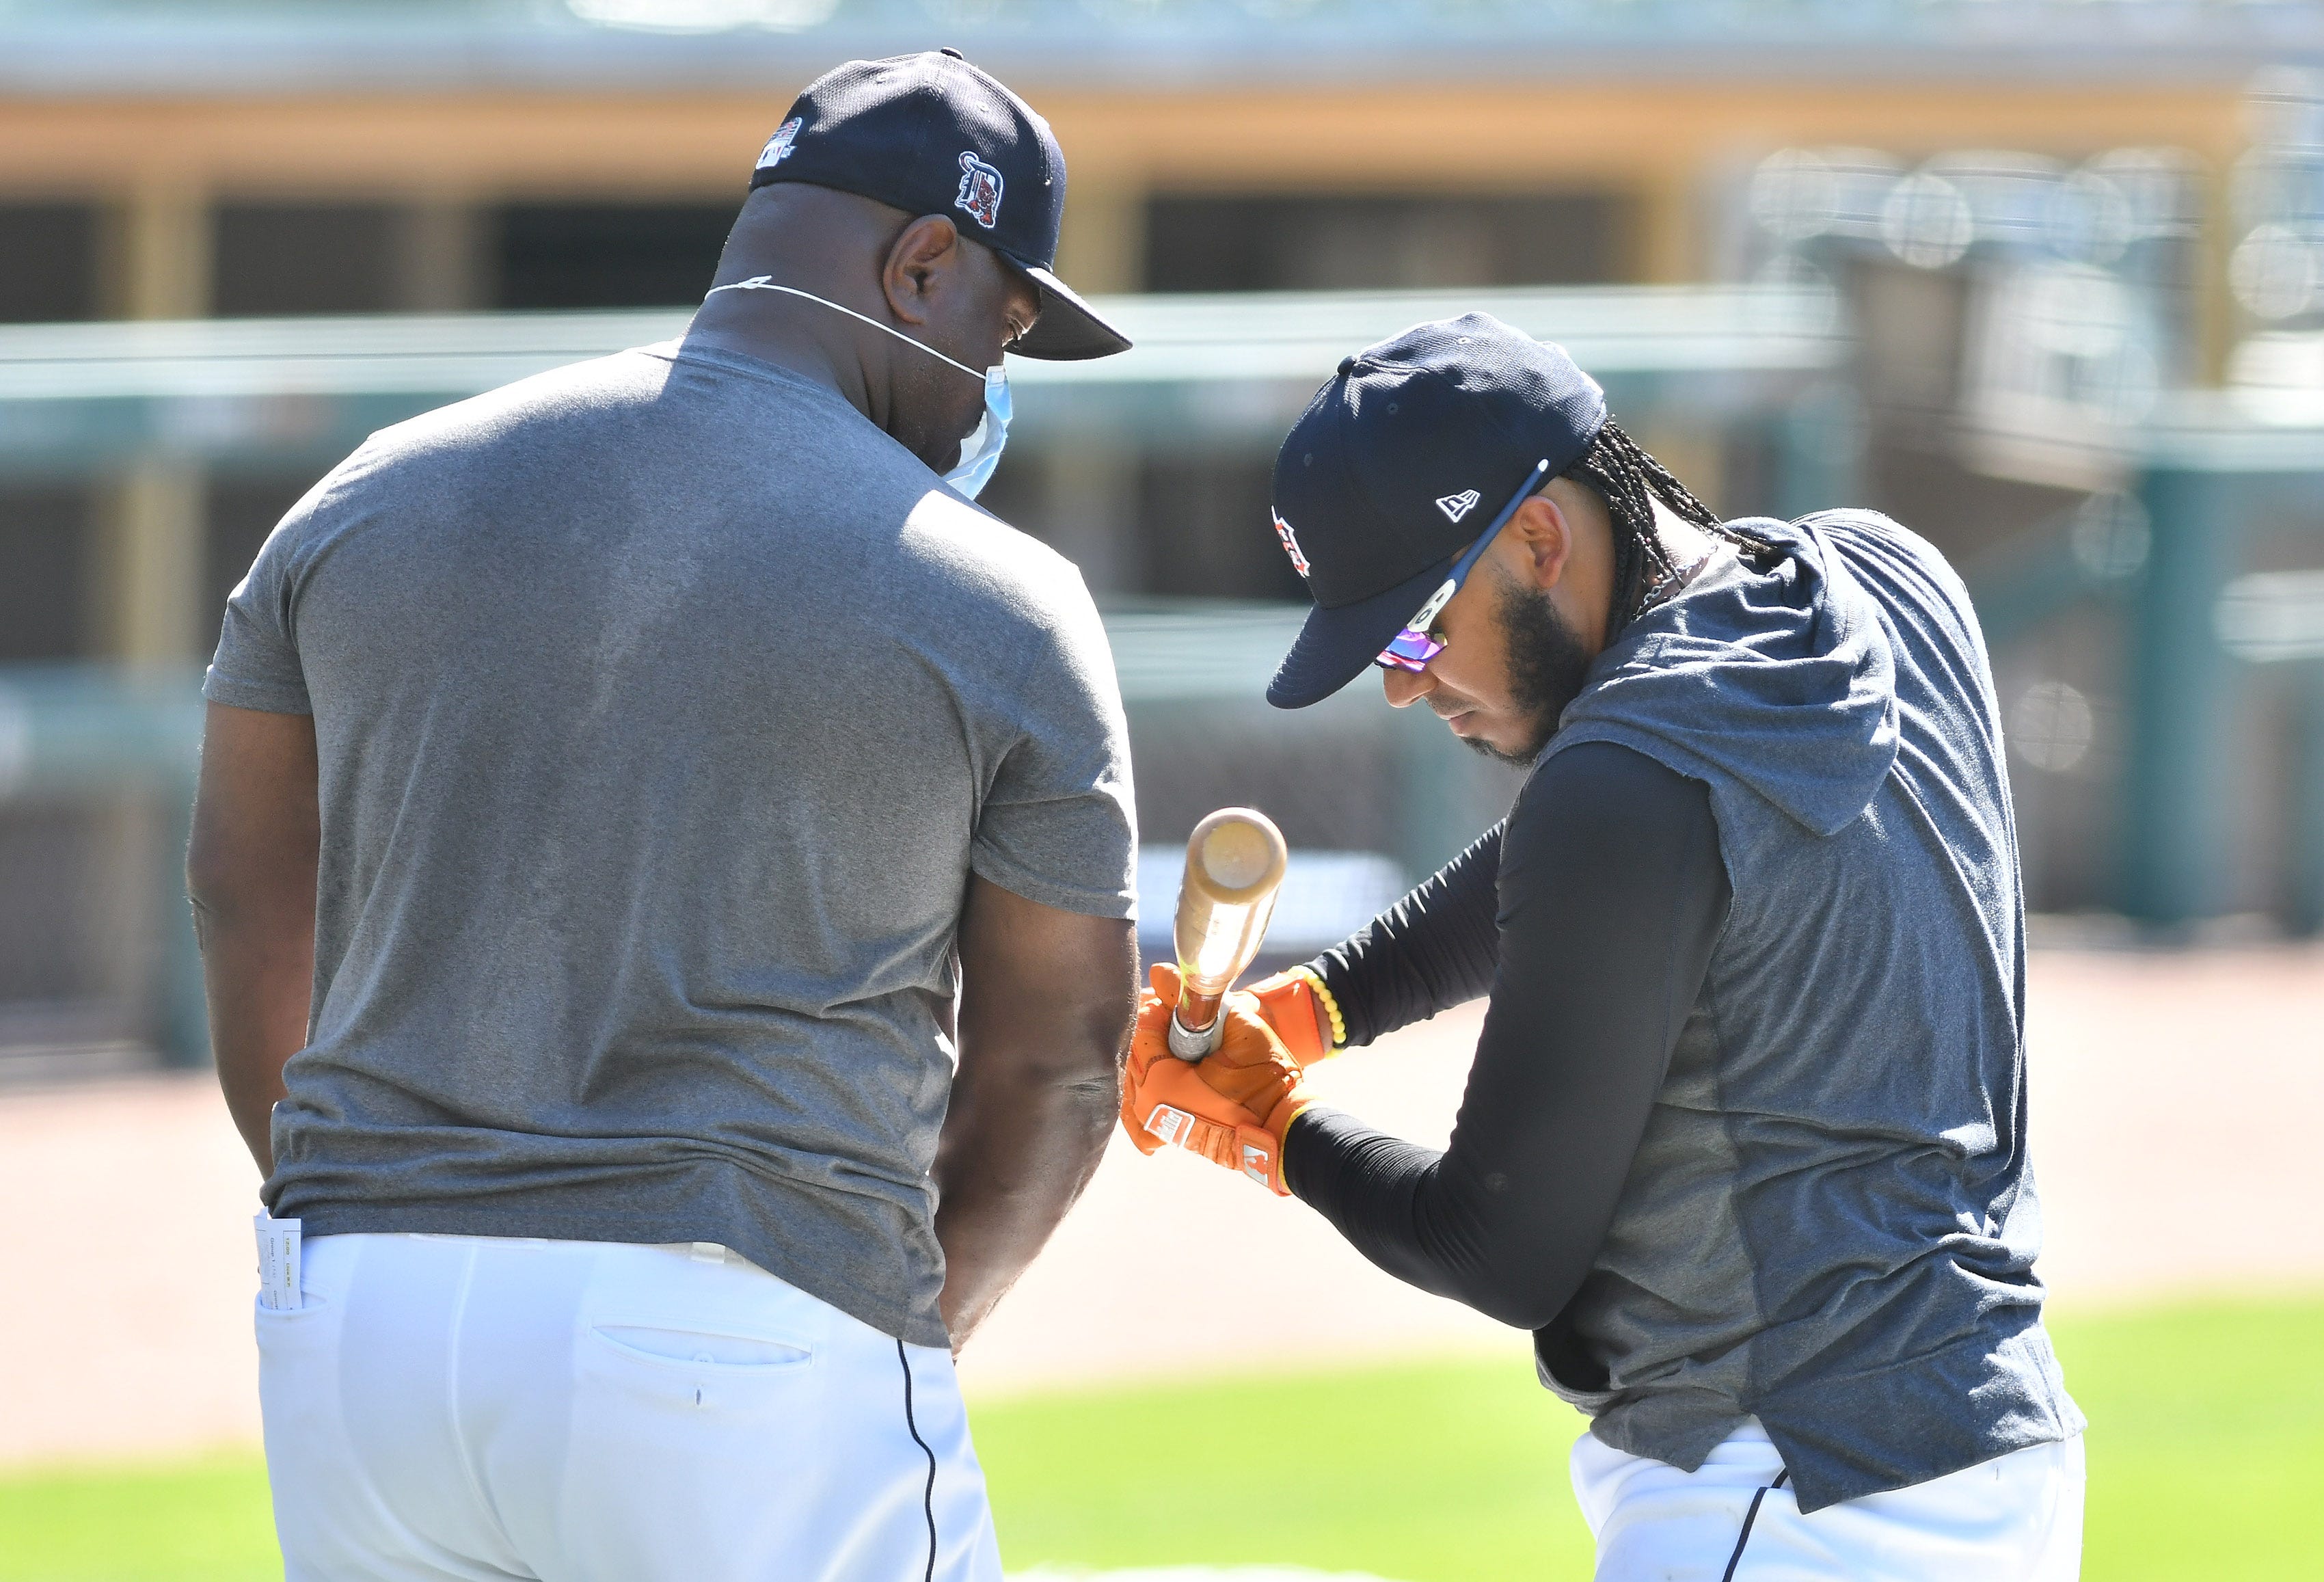 Tigers assistant hitting coach Phil Clark works with Harold Castro during batting practice.